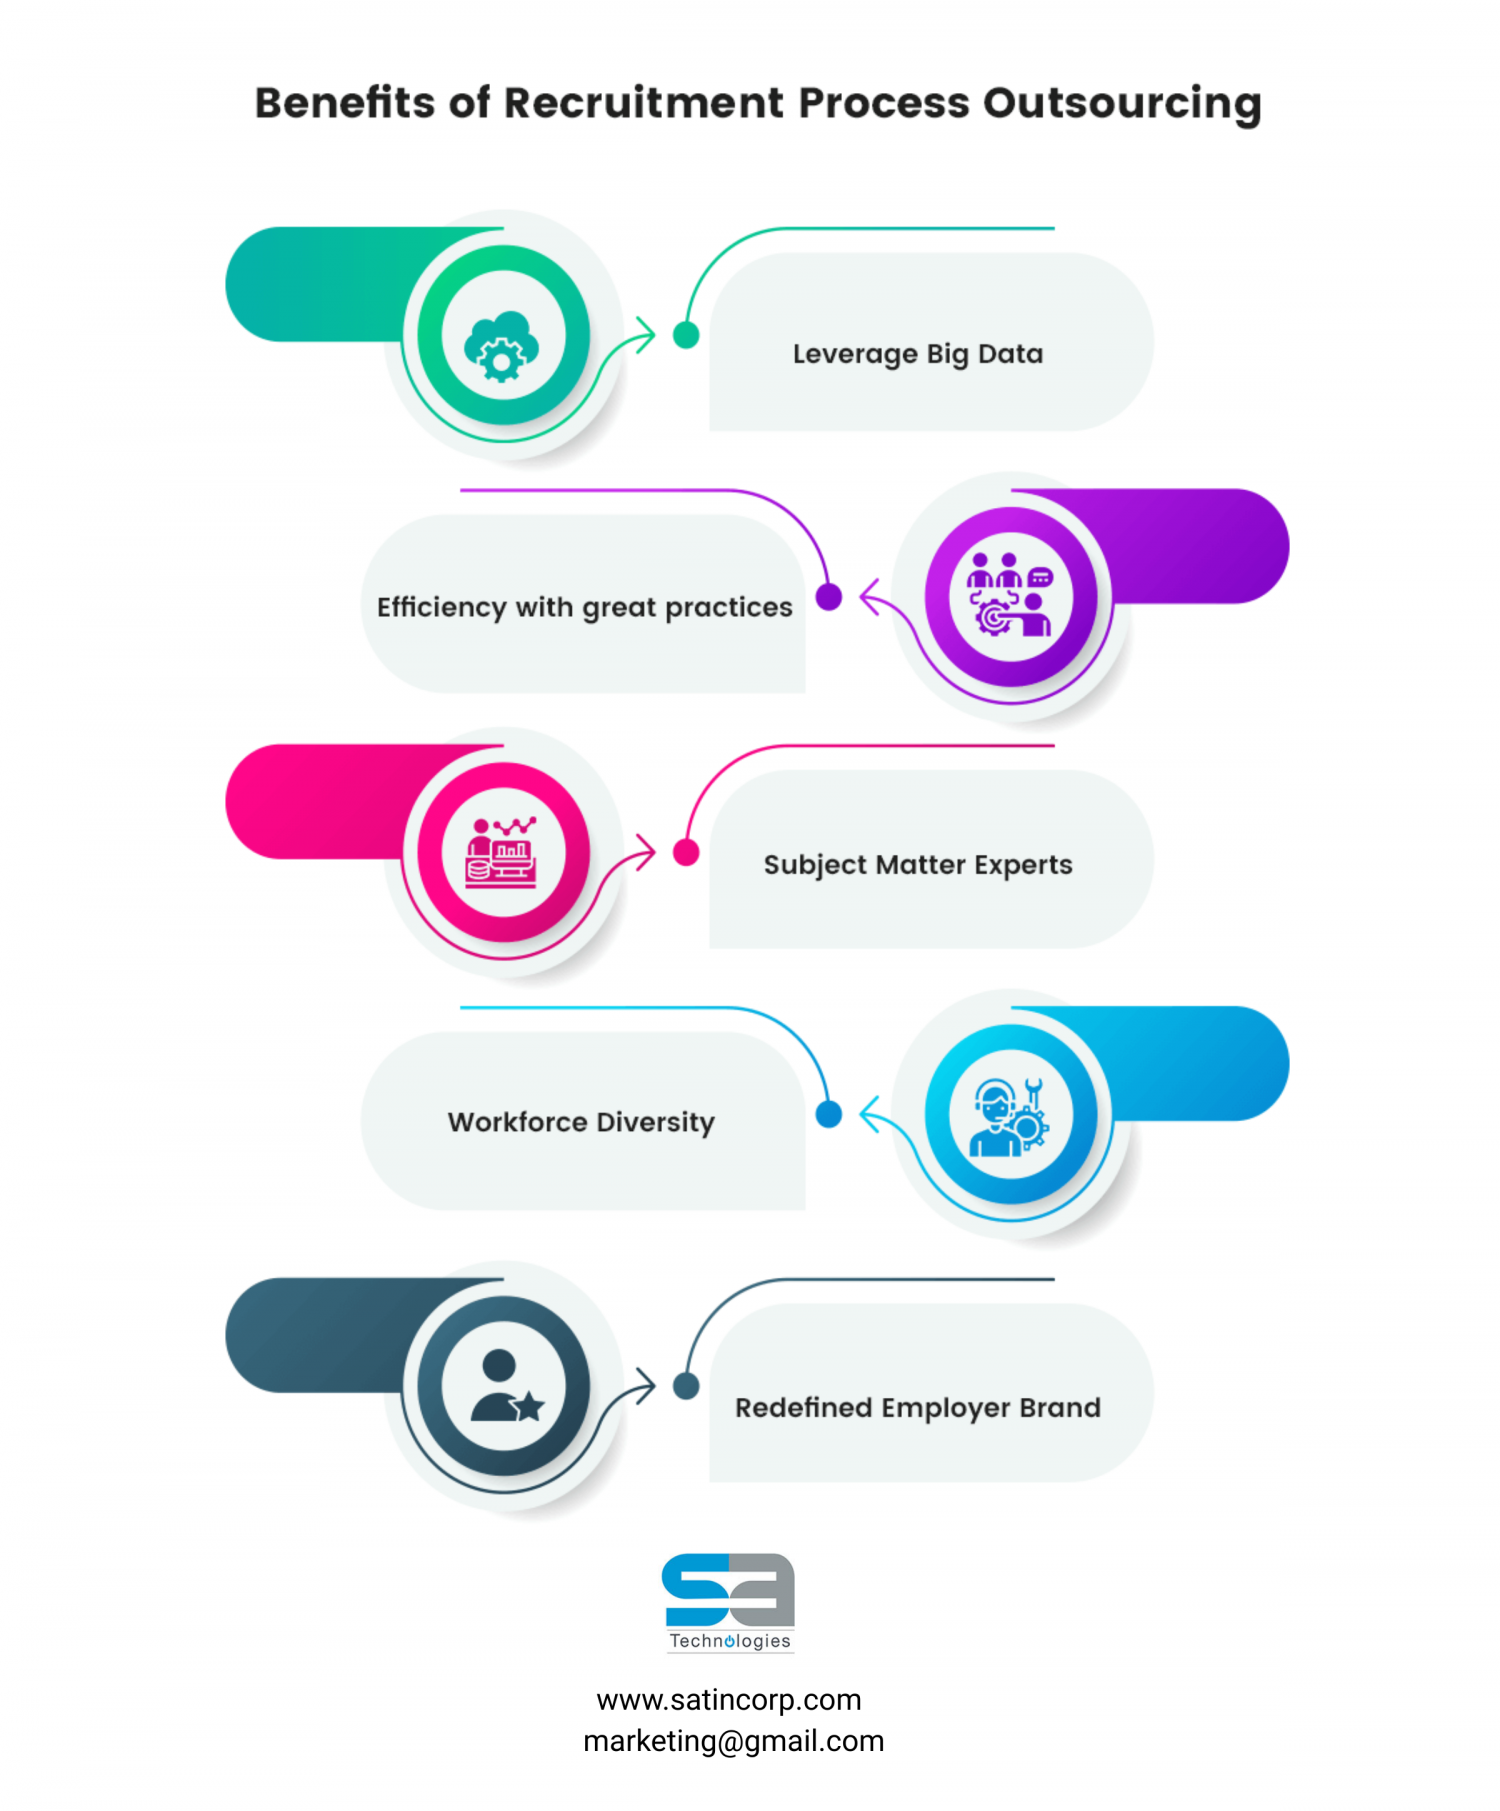 Benefits of Recruitment Process Outsourcing   Infographic